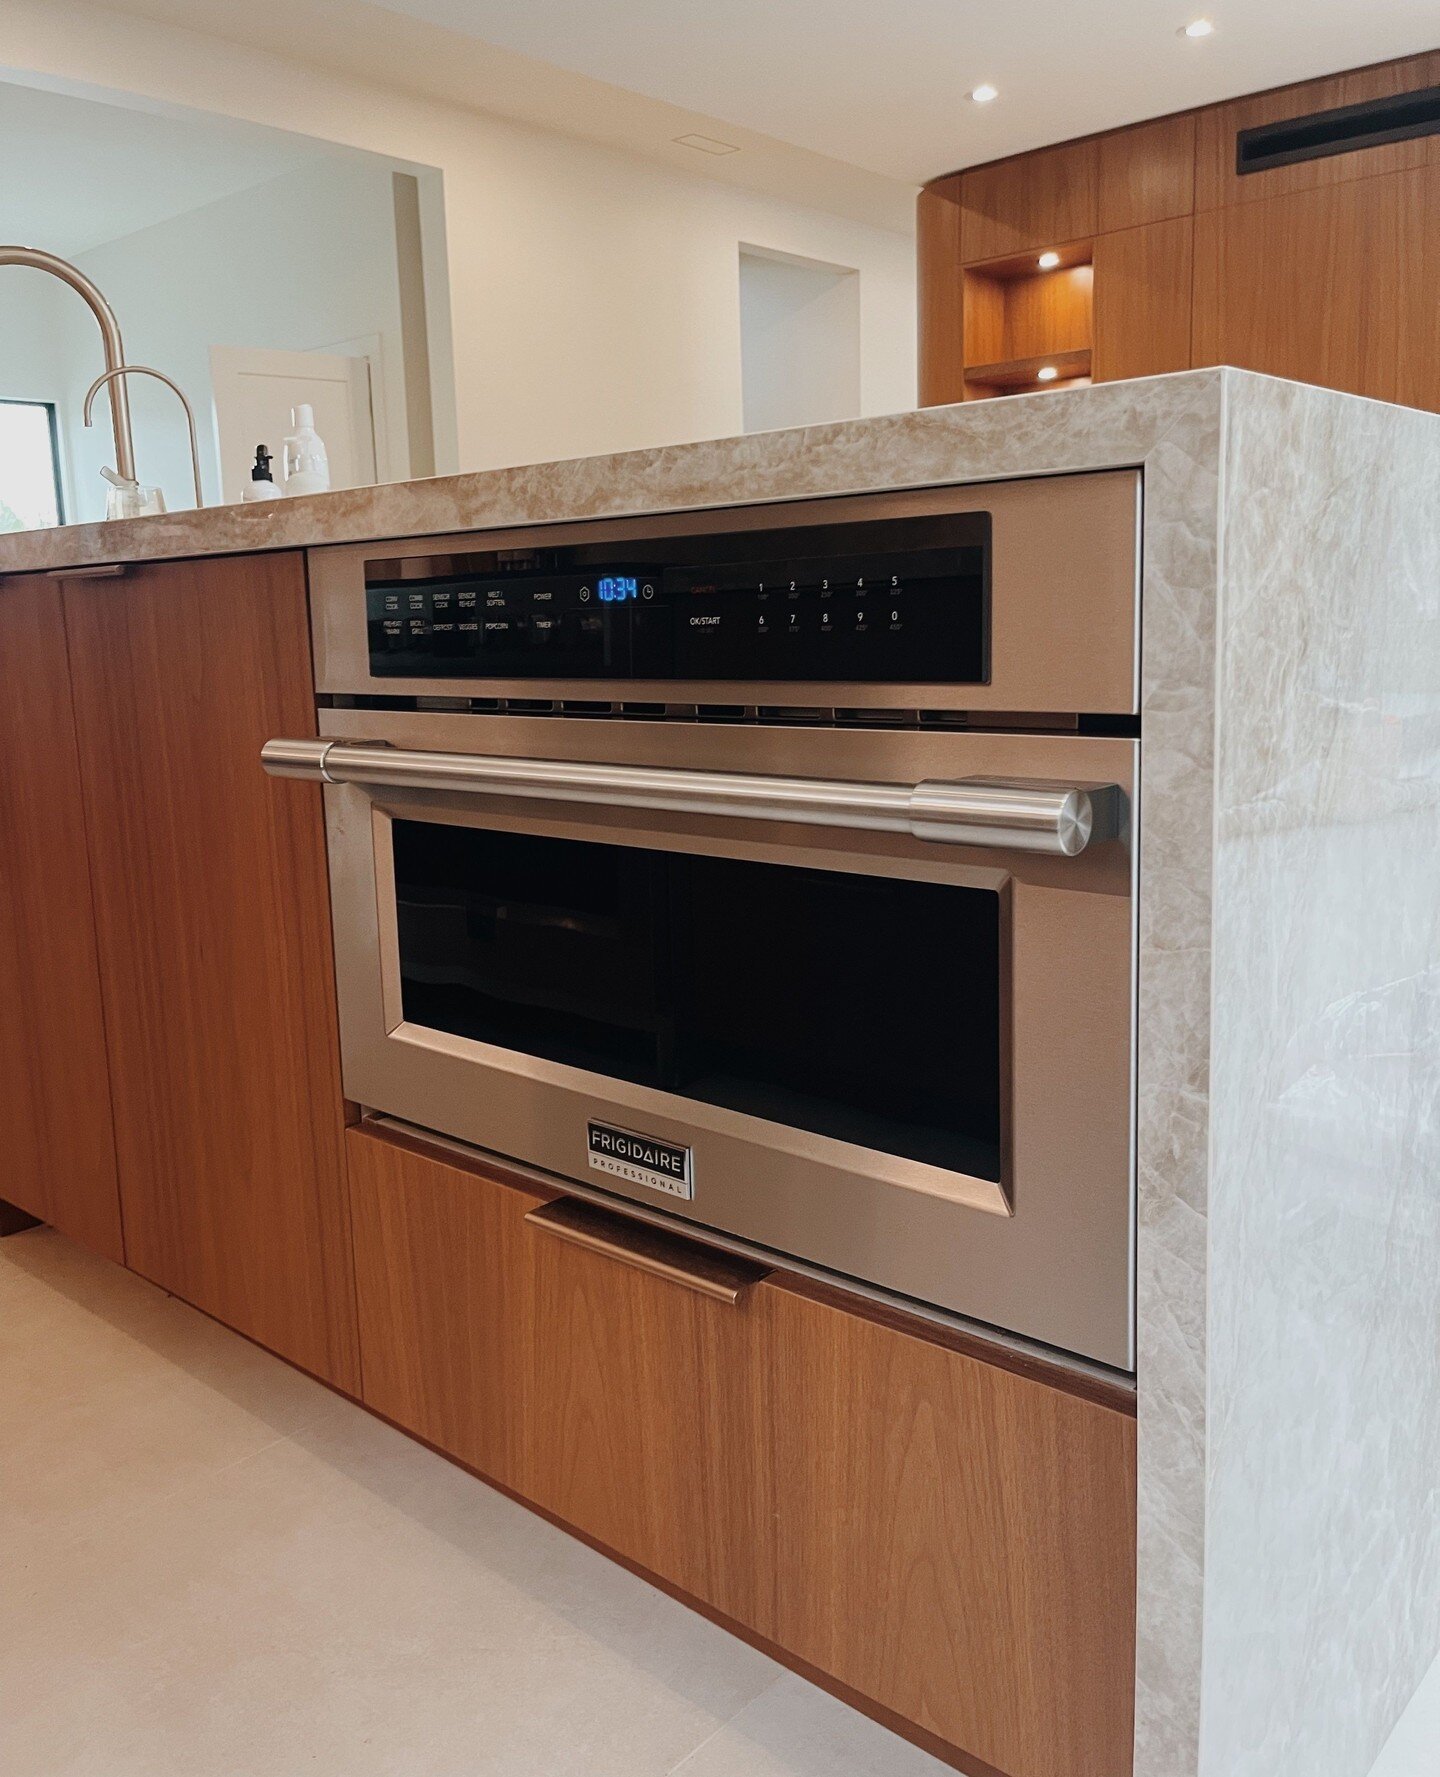 We love when the microwave is tucked away from view. This Frigidaire does just the trick, convenient but isn't the first thing you see when you enter the kitchen. Also, that waterfall counter ✨️⁠
⁠
New Custom Build by @marquiseconstruction⁠
Architect